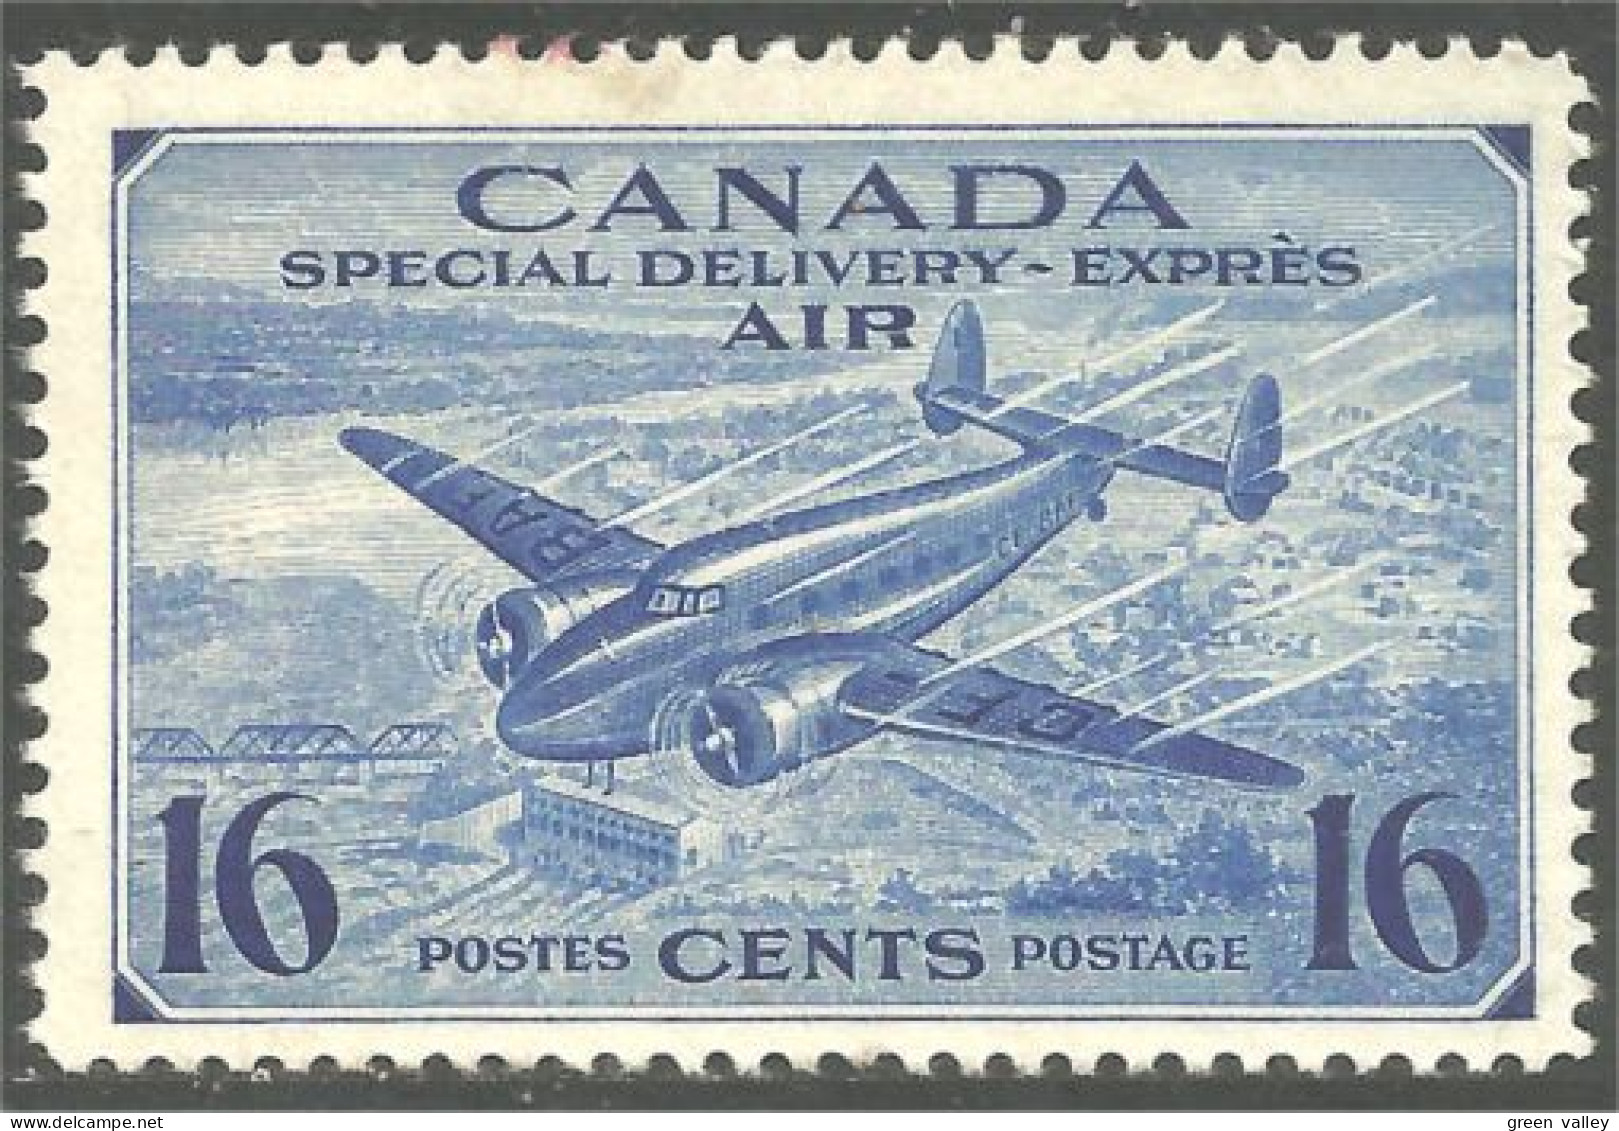 Canada Avion Airplane Flugzeug Aereo 16c Bleu Blue Special Delivery Exprès MNH ** Neuf SC (CCE-1a) - Luftpost-Express